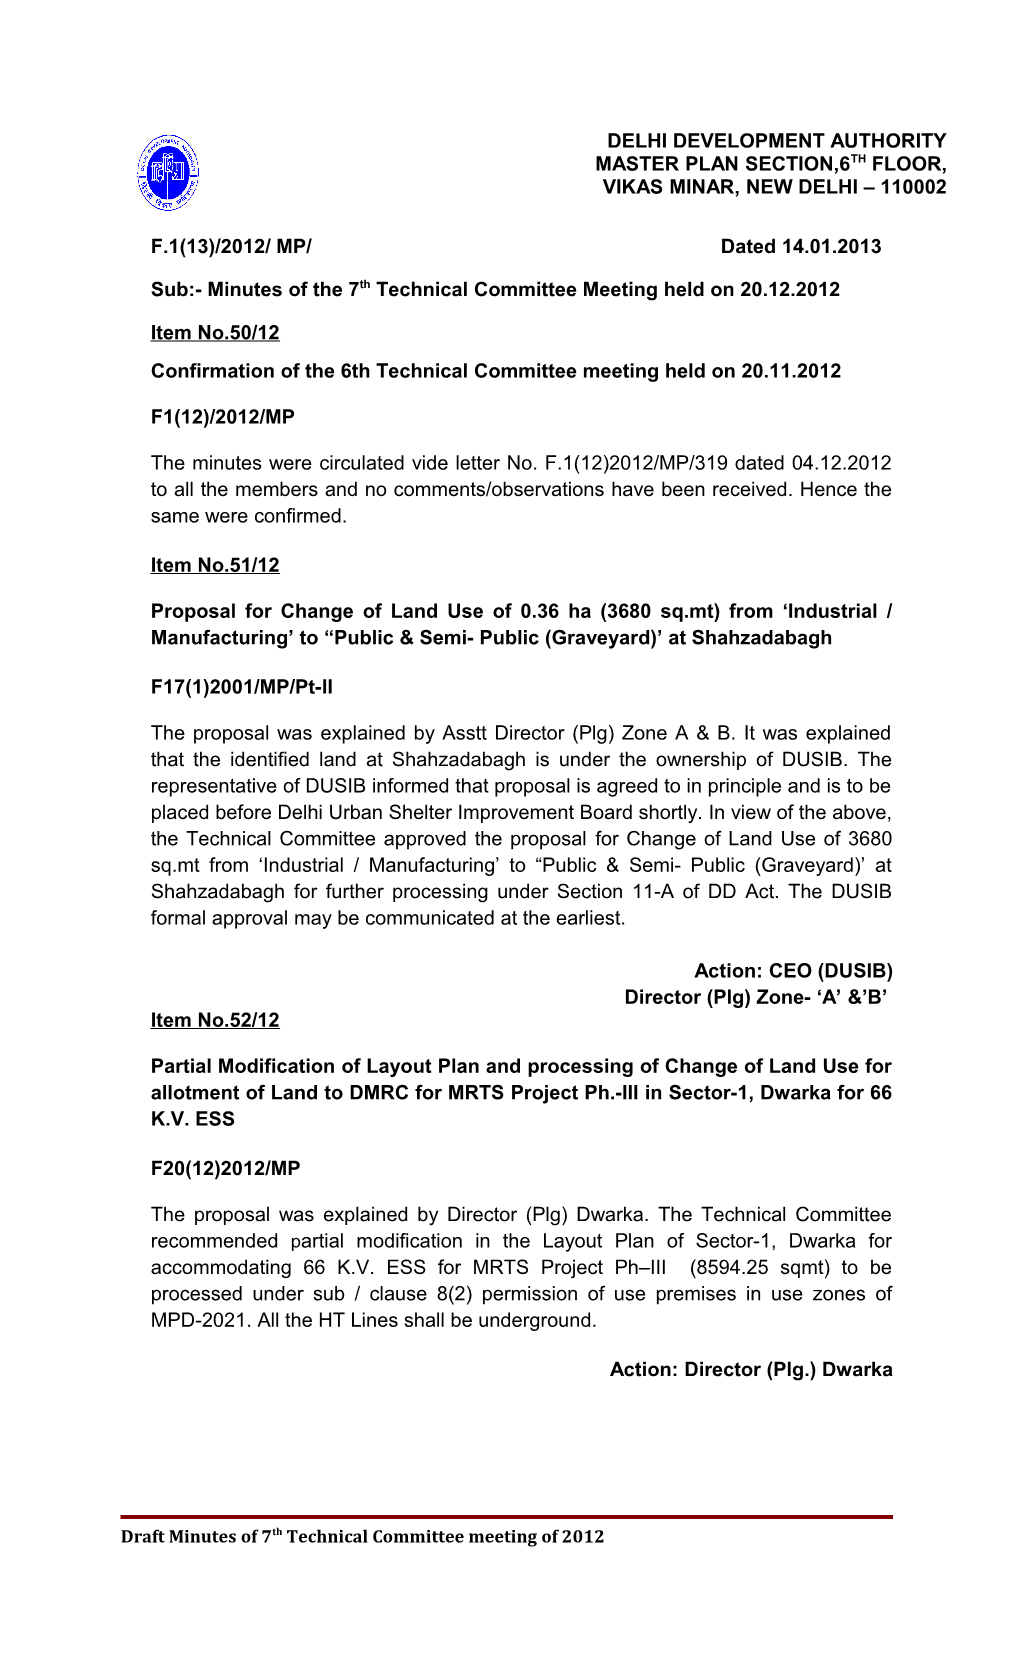 Sub:- Minutes of the 7Thtechnical Committee Meeting Held on 20.12.2012